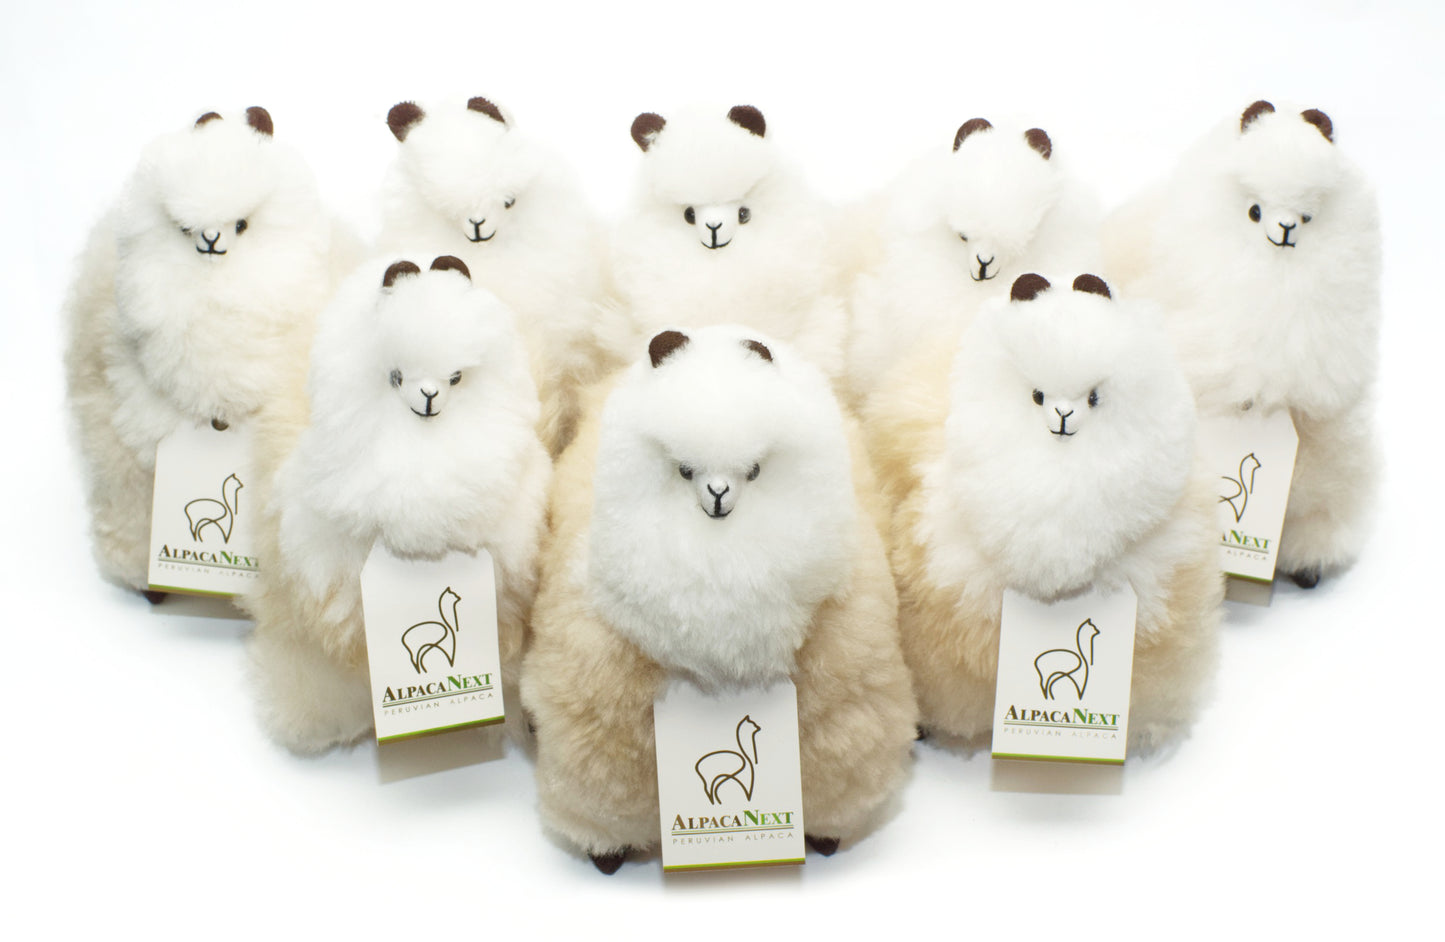 Alpaca Fur Toy. Soft Alpaca Plush. Fluffy and Cuddly. (9 inches, Beige and White)